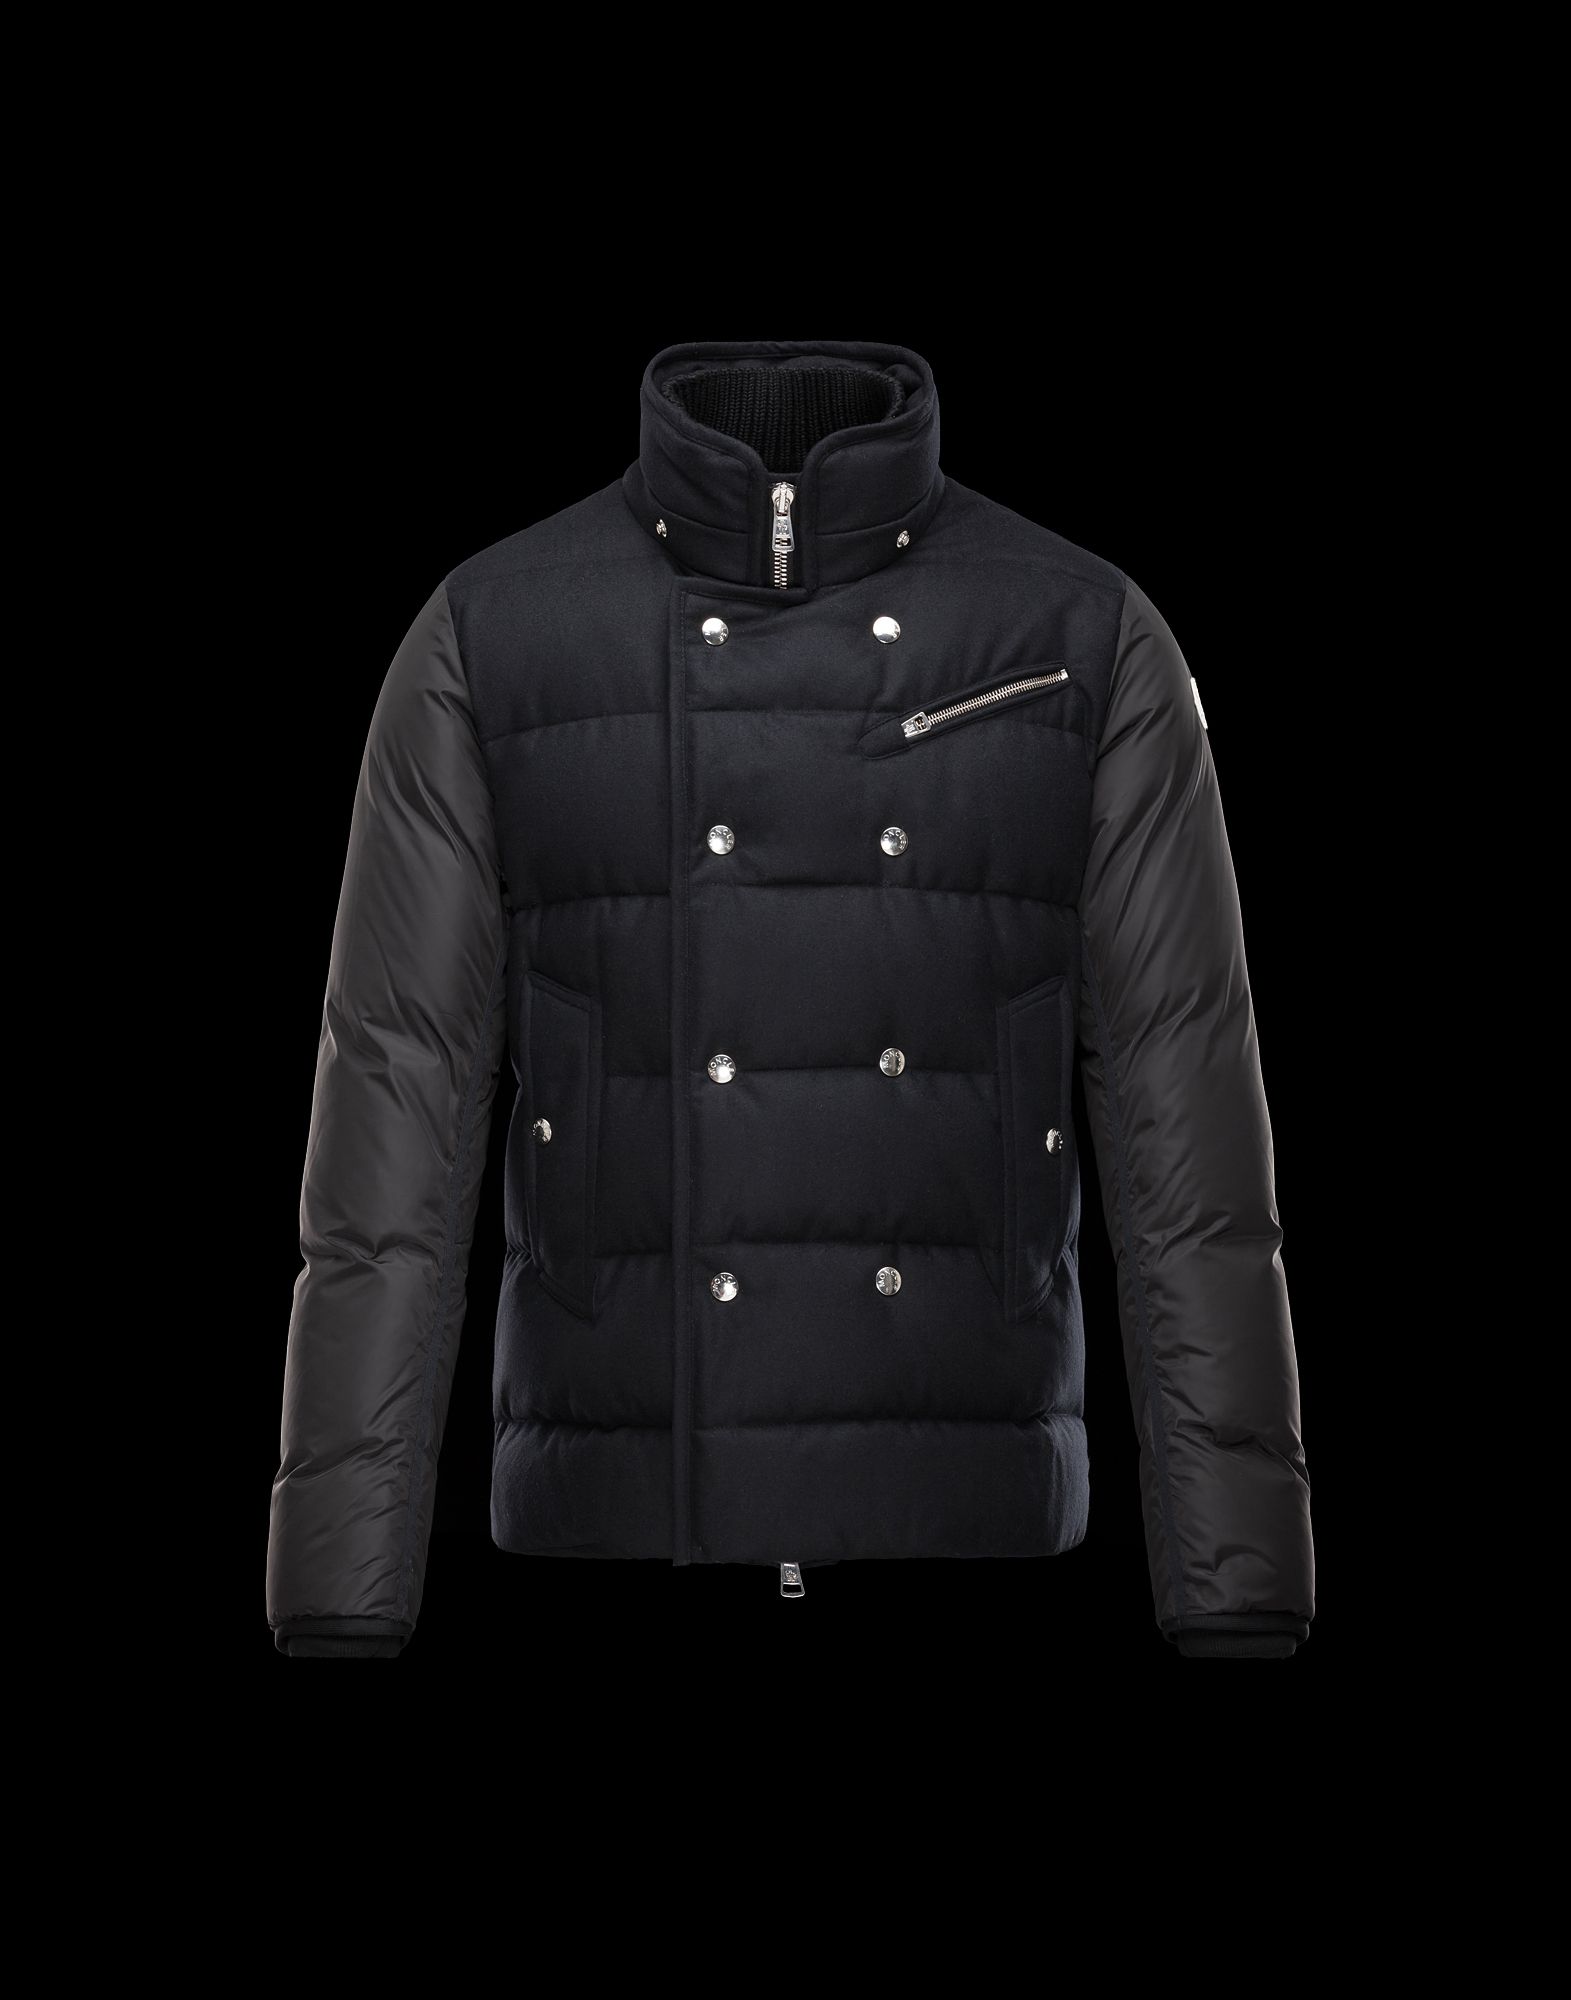 moncler jackets - Cool Brain Candy